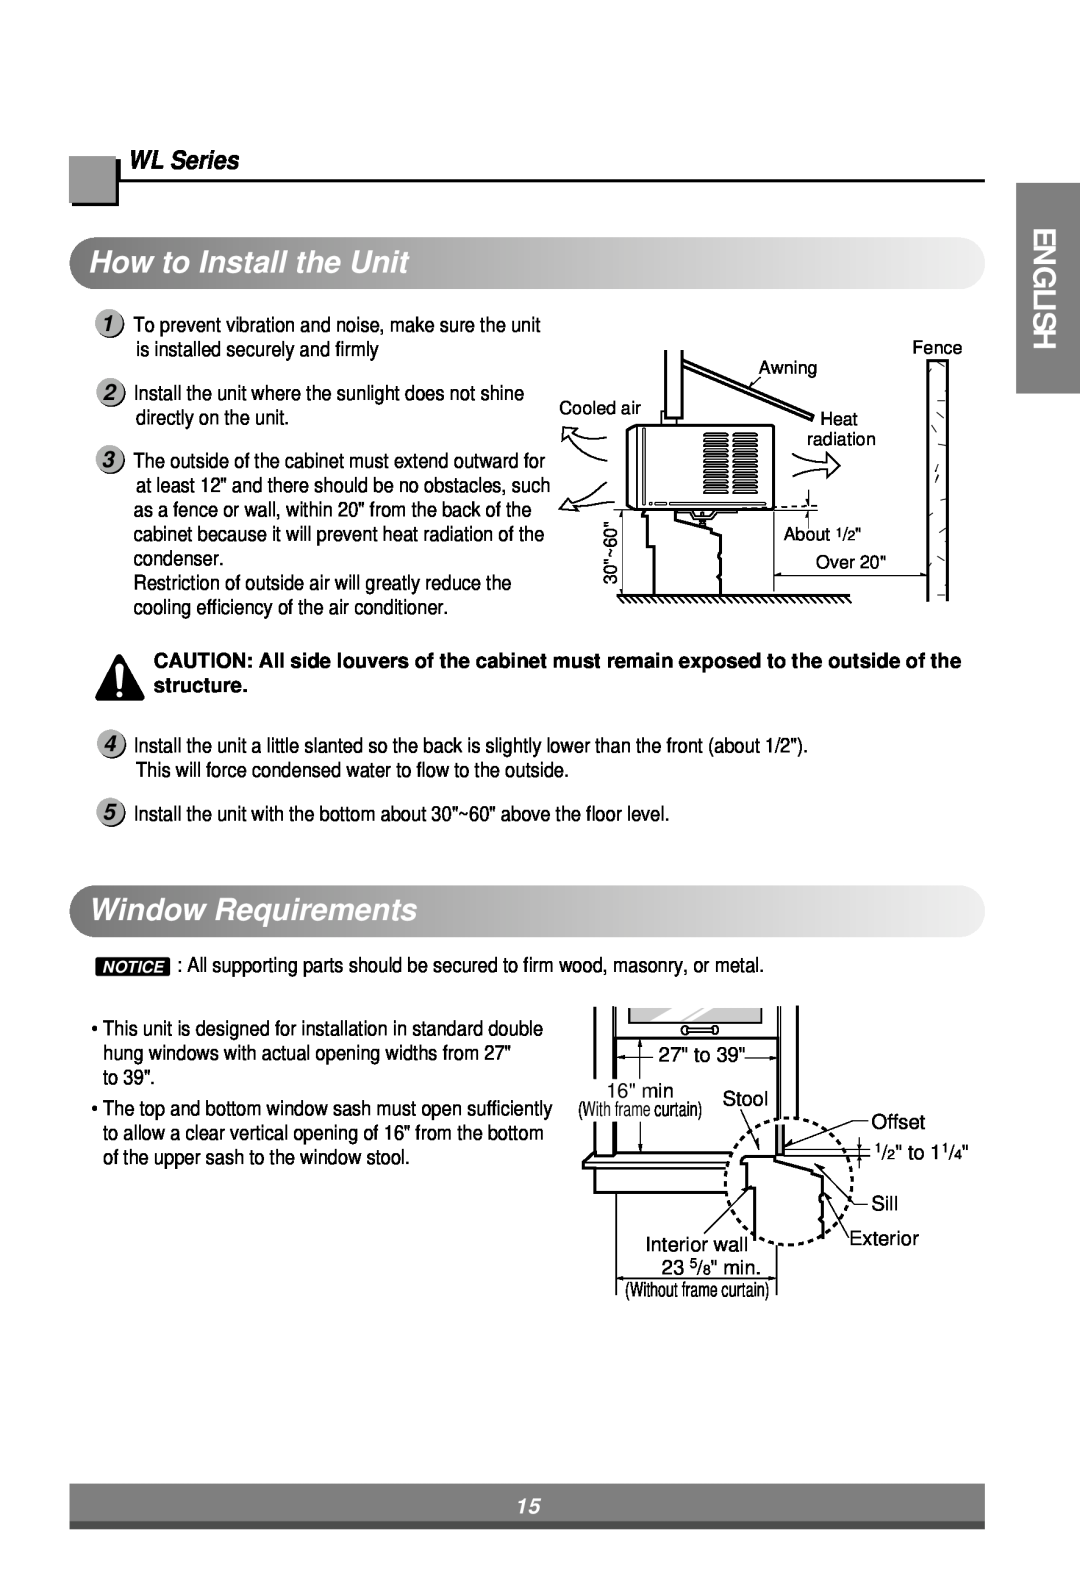 LG Electronics LW7000ER owner manual HowtoInstall the Unit, WL Series, WindowRequirements, English 